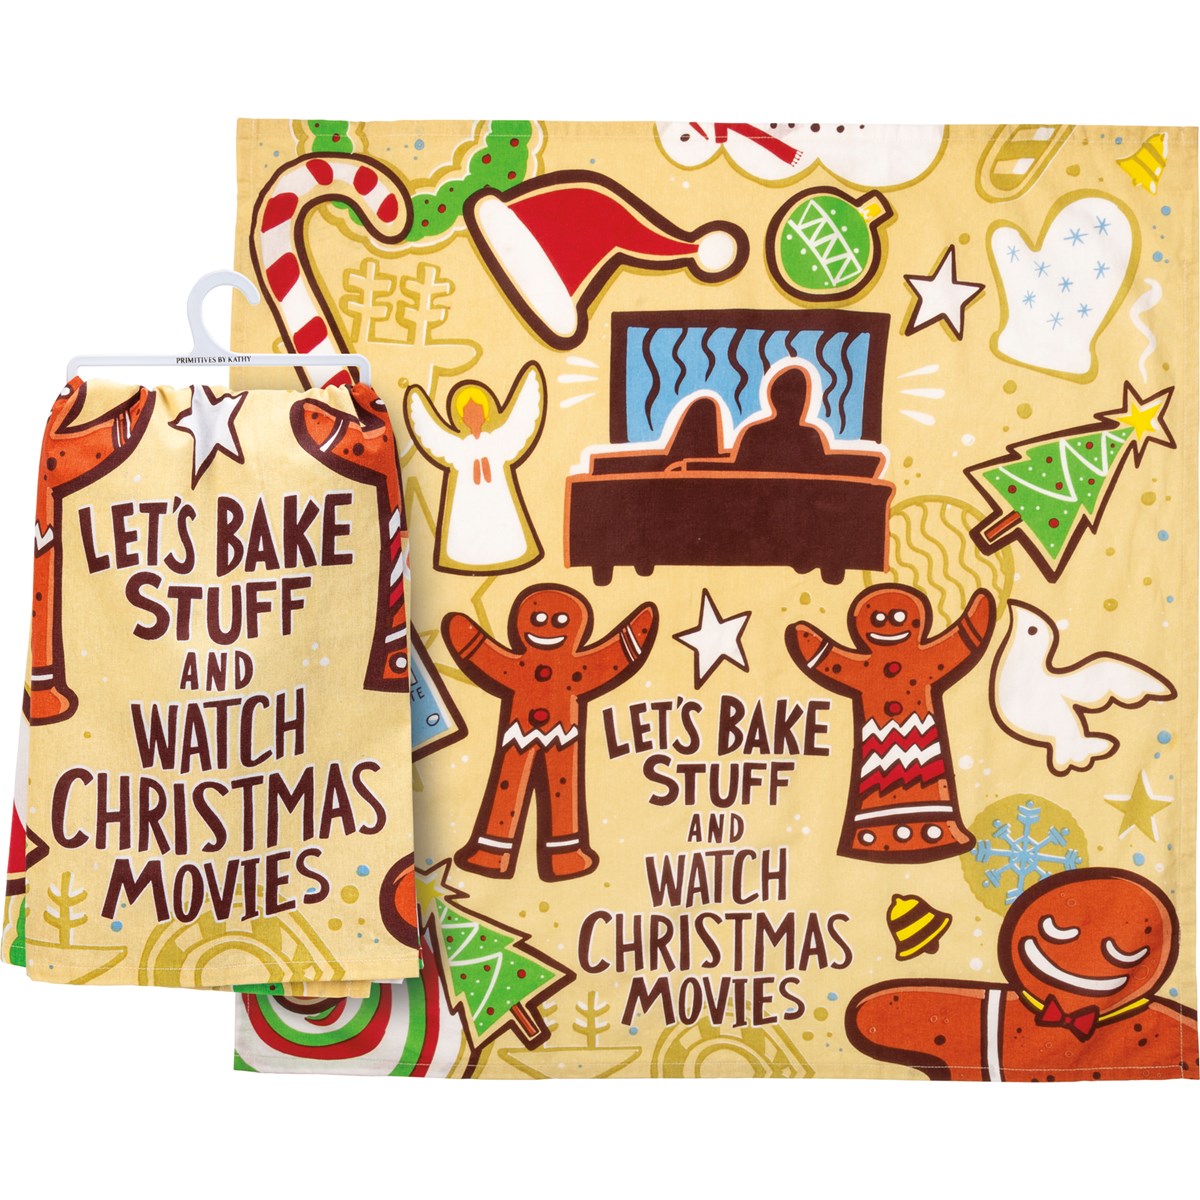 Primitives By Kathy Kitchen Towel - Let's Bake Stuff And Watch Movies-Primitives by Kathy-Little Giant Kidz